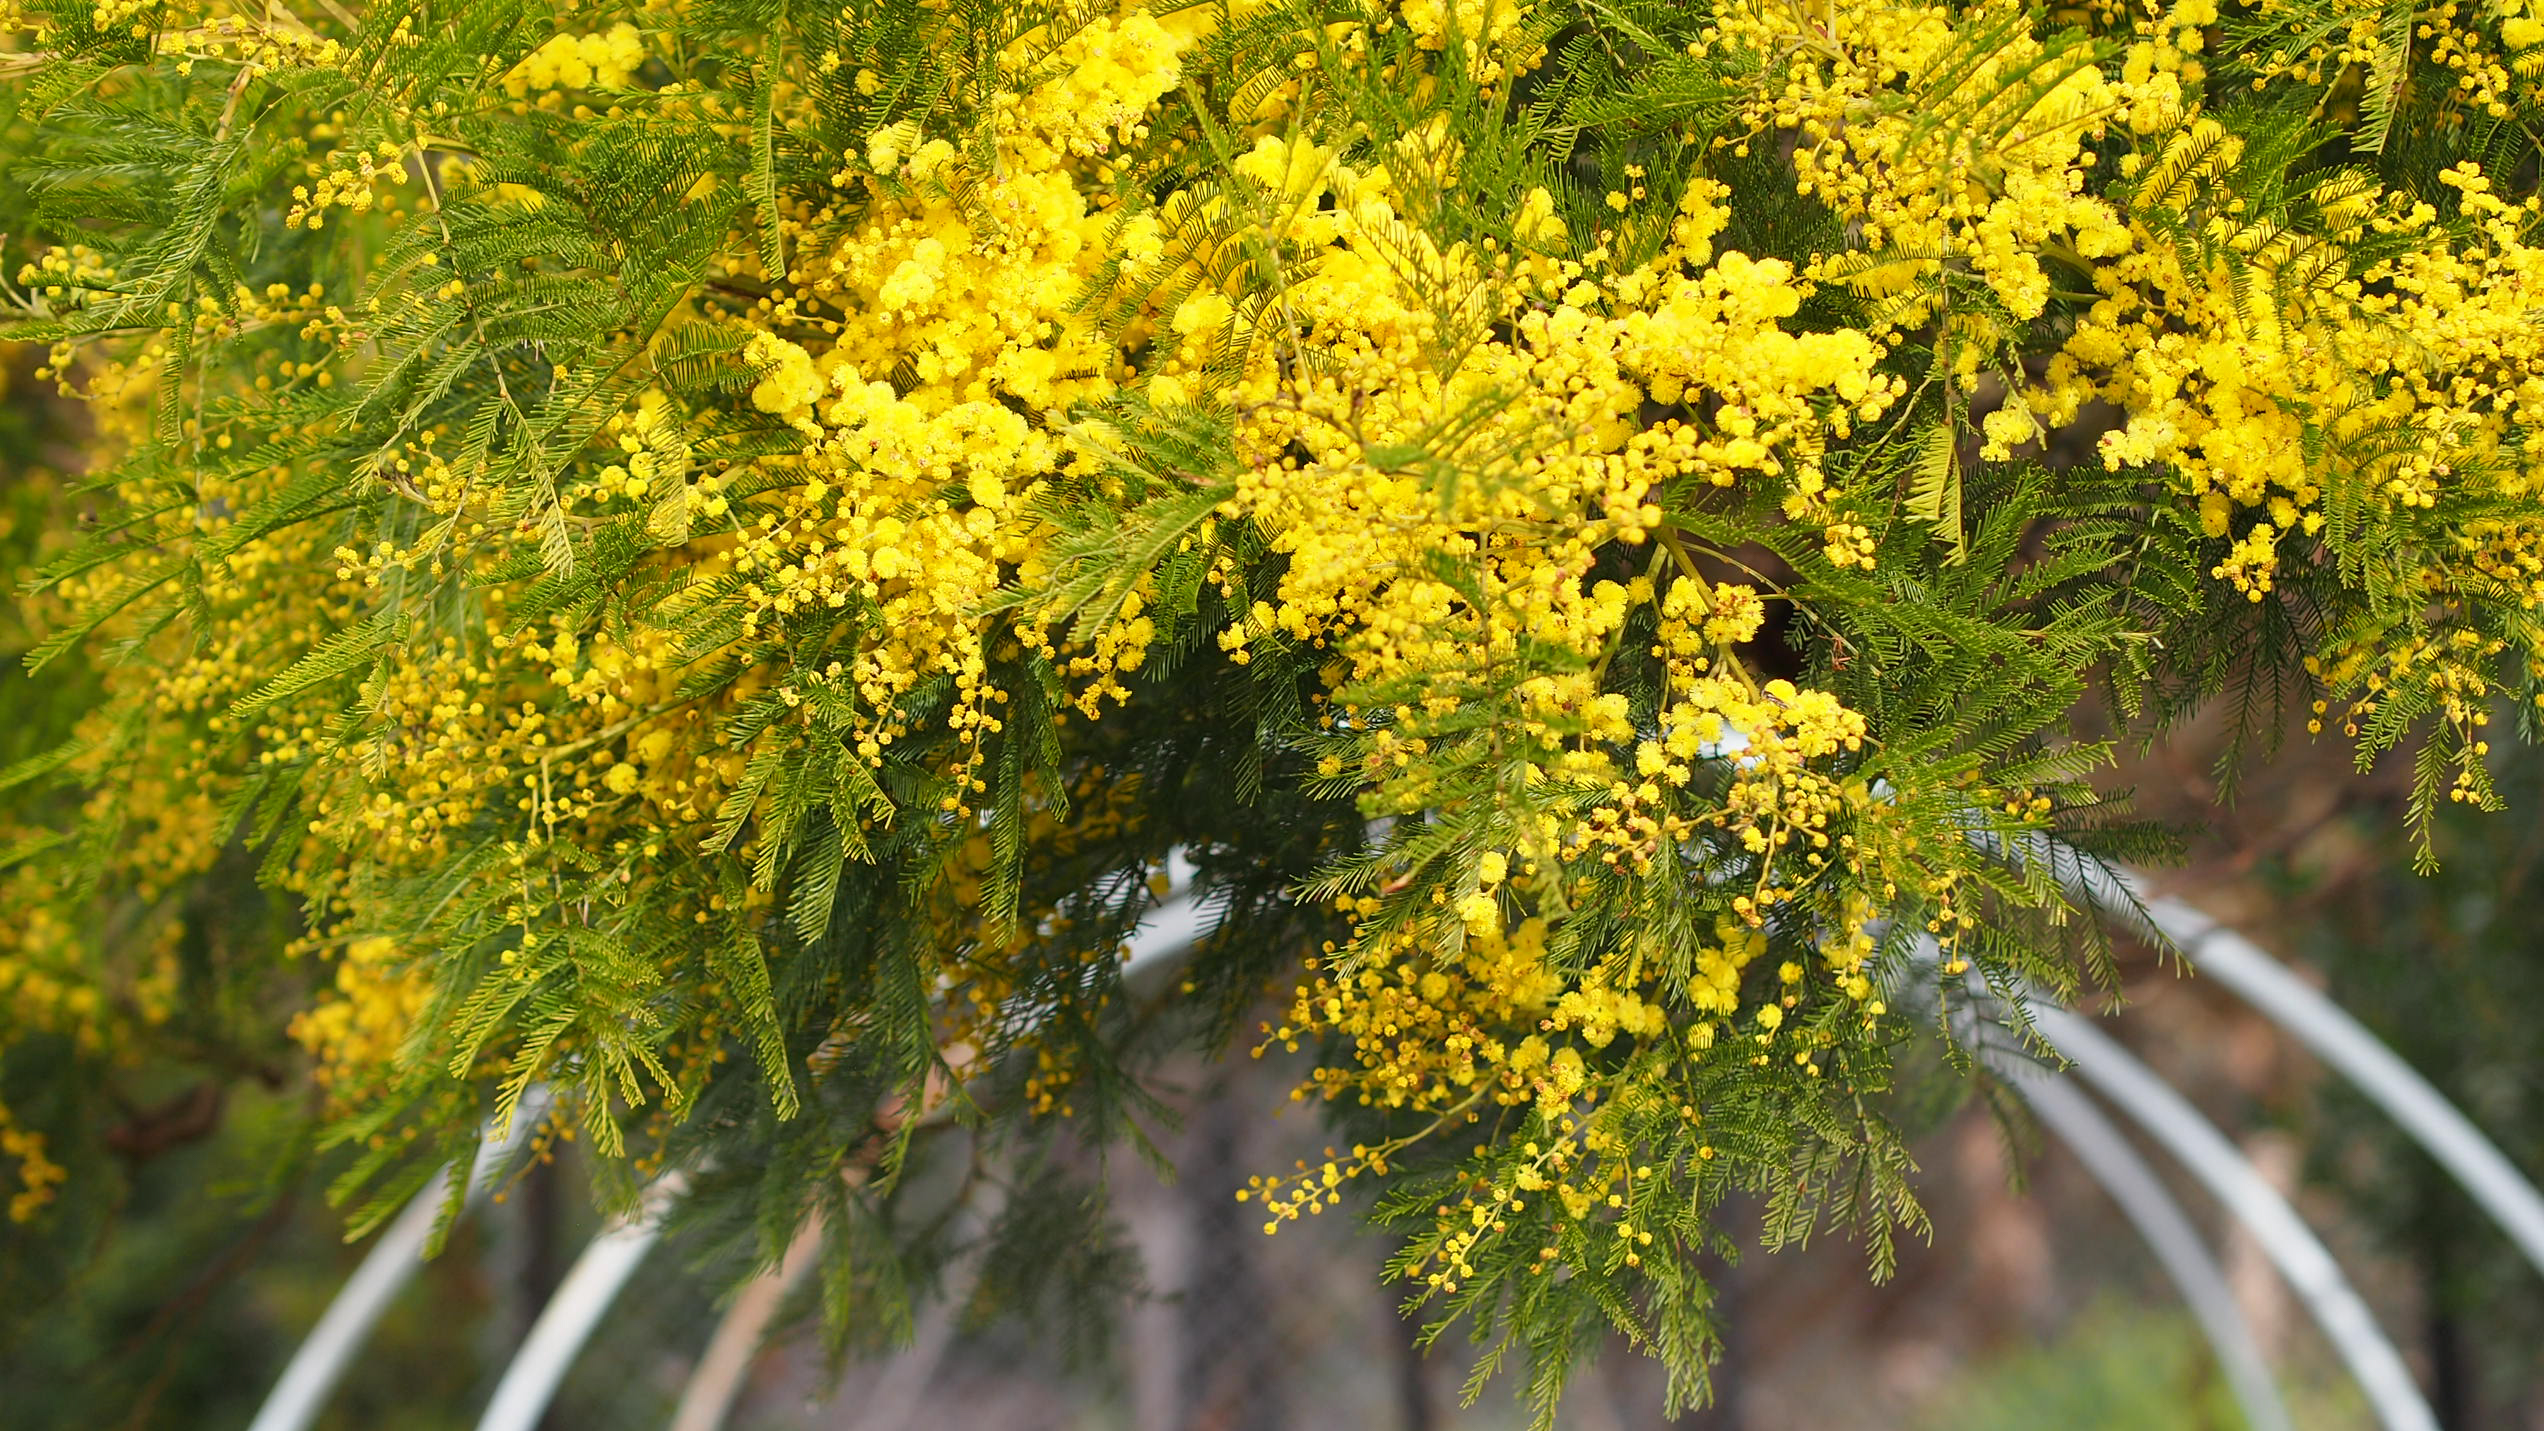 A spray of bright yellow wattle drips down from the top of the image, on top of curved hoops of a small greenhouse.